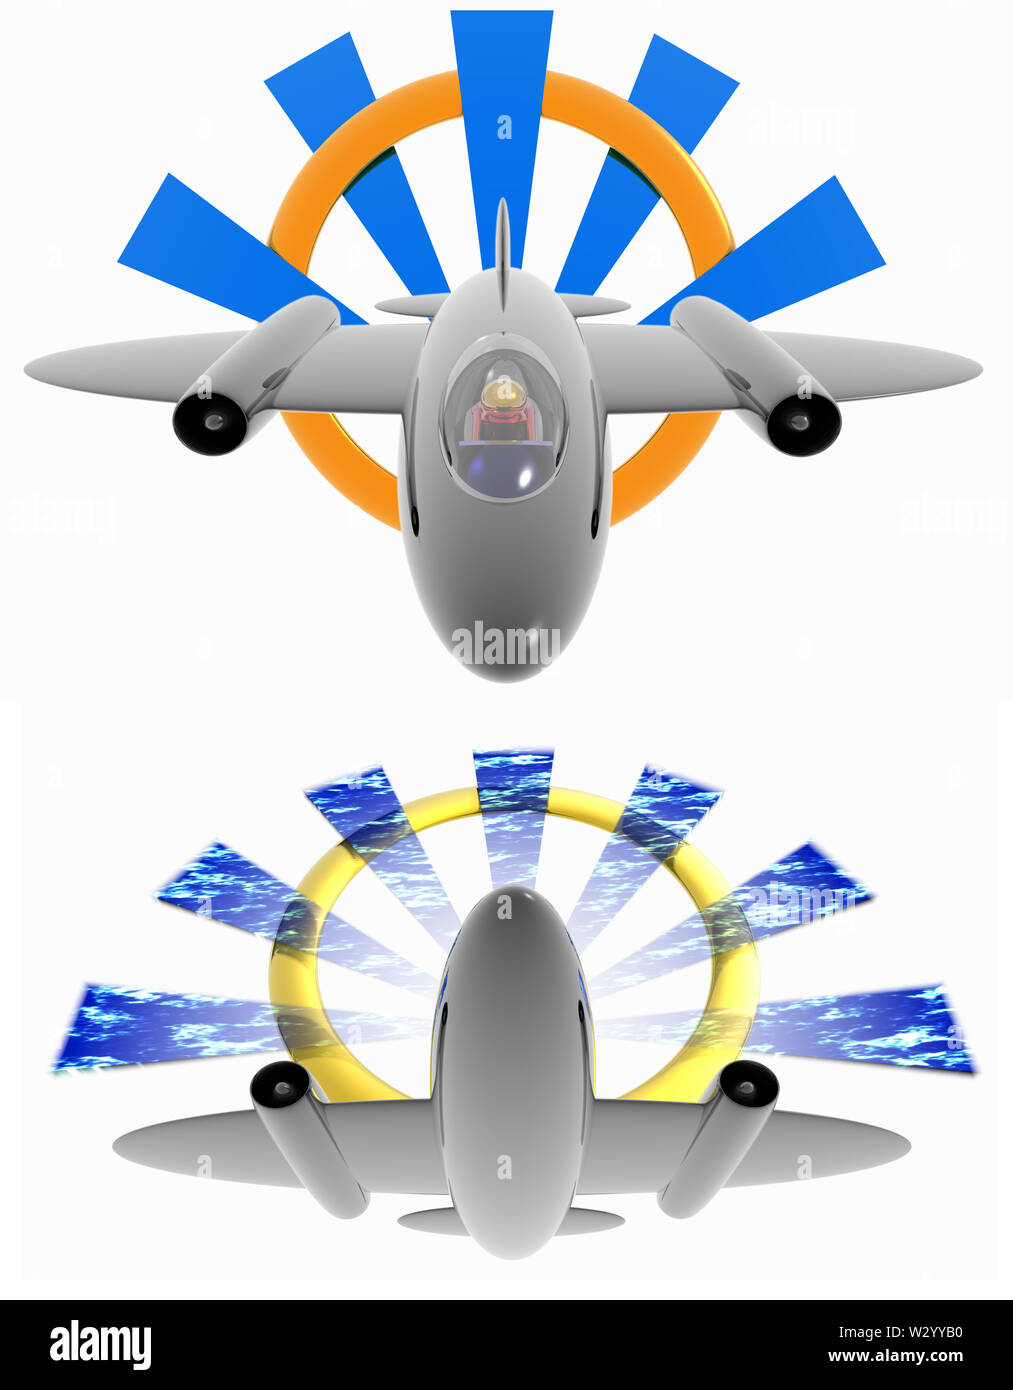 An illustration of a jet plane with  a graphic burst behind on a white background Stock Photo